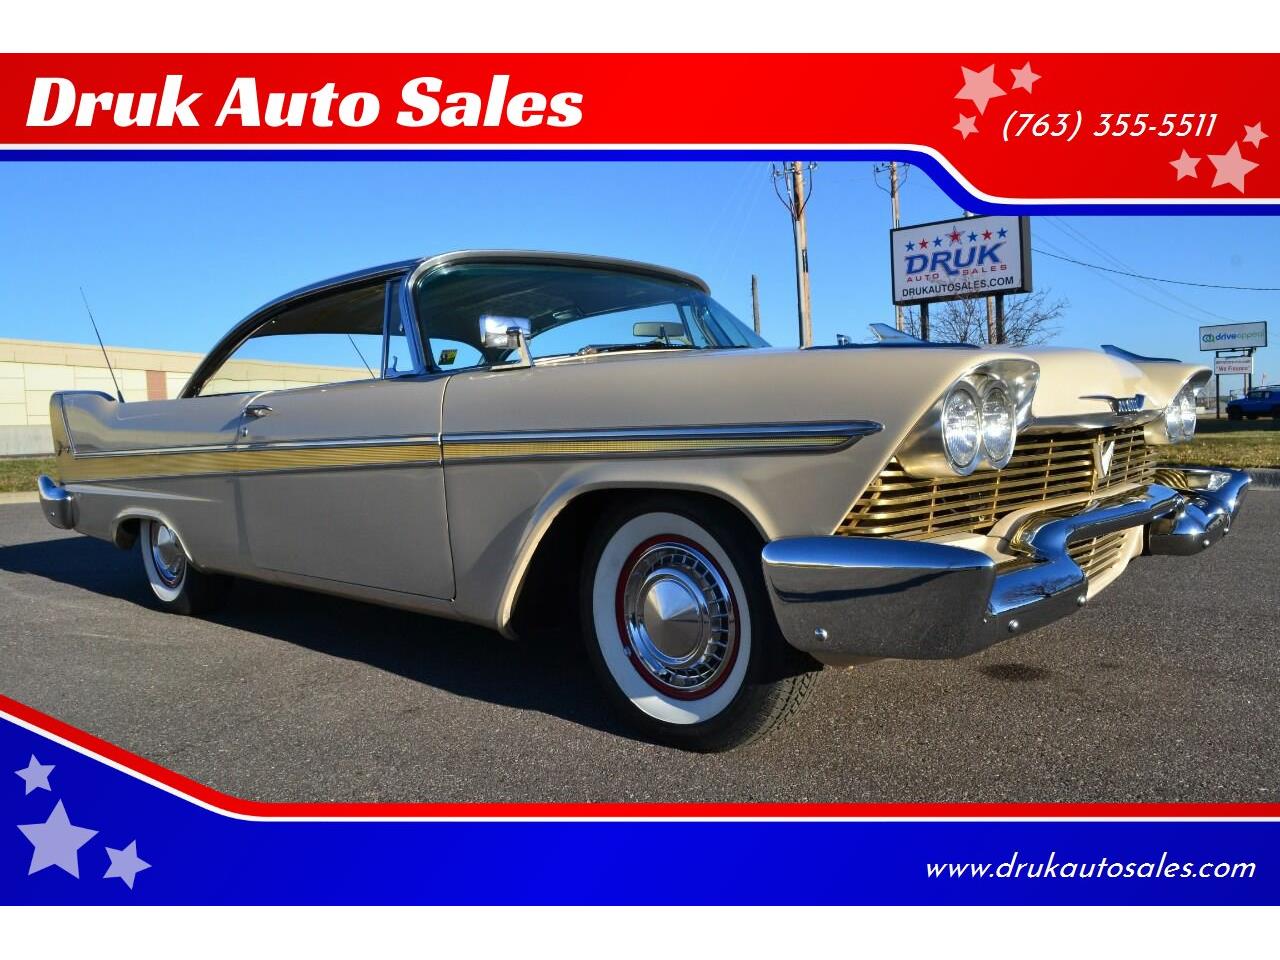 1958 Plymouth Fury (CC-1428730) for sale in Ramsey, Minnesota